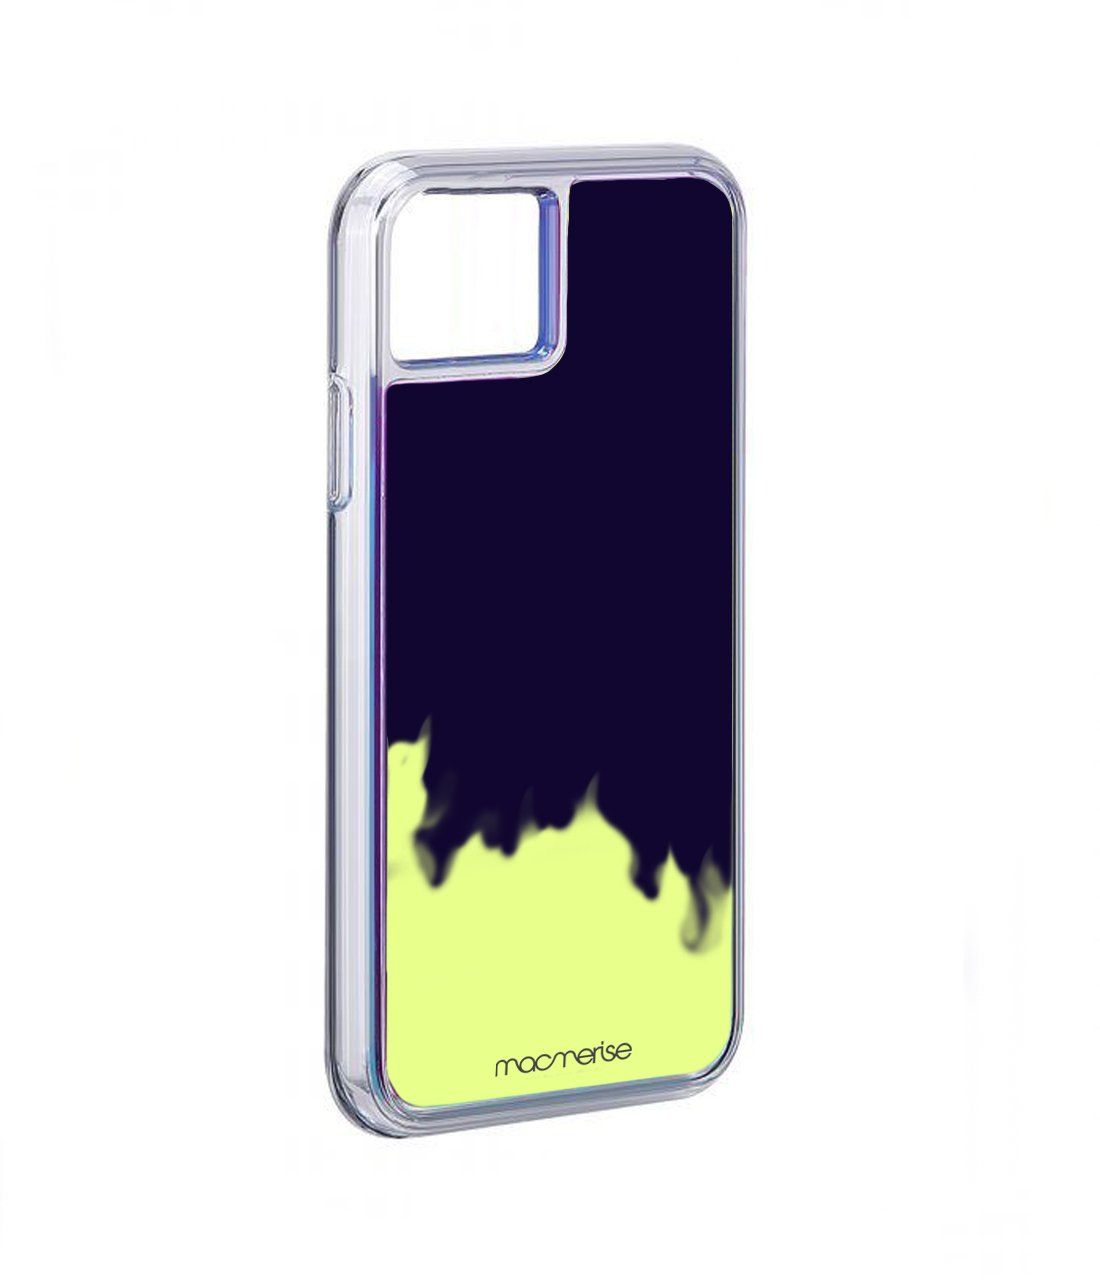 Neon Sand Blue - Neon Sand Phone Case for iPhone 11 Pro